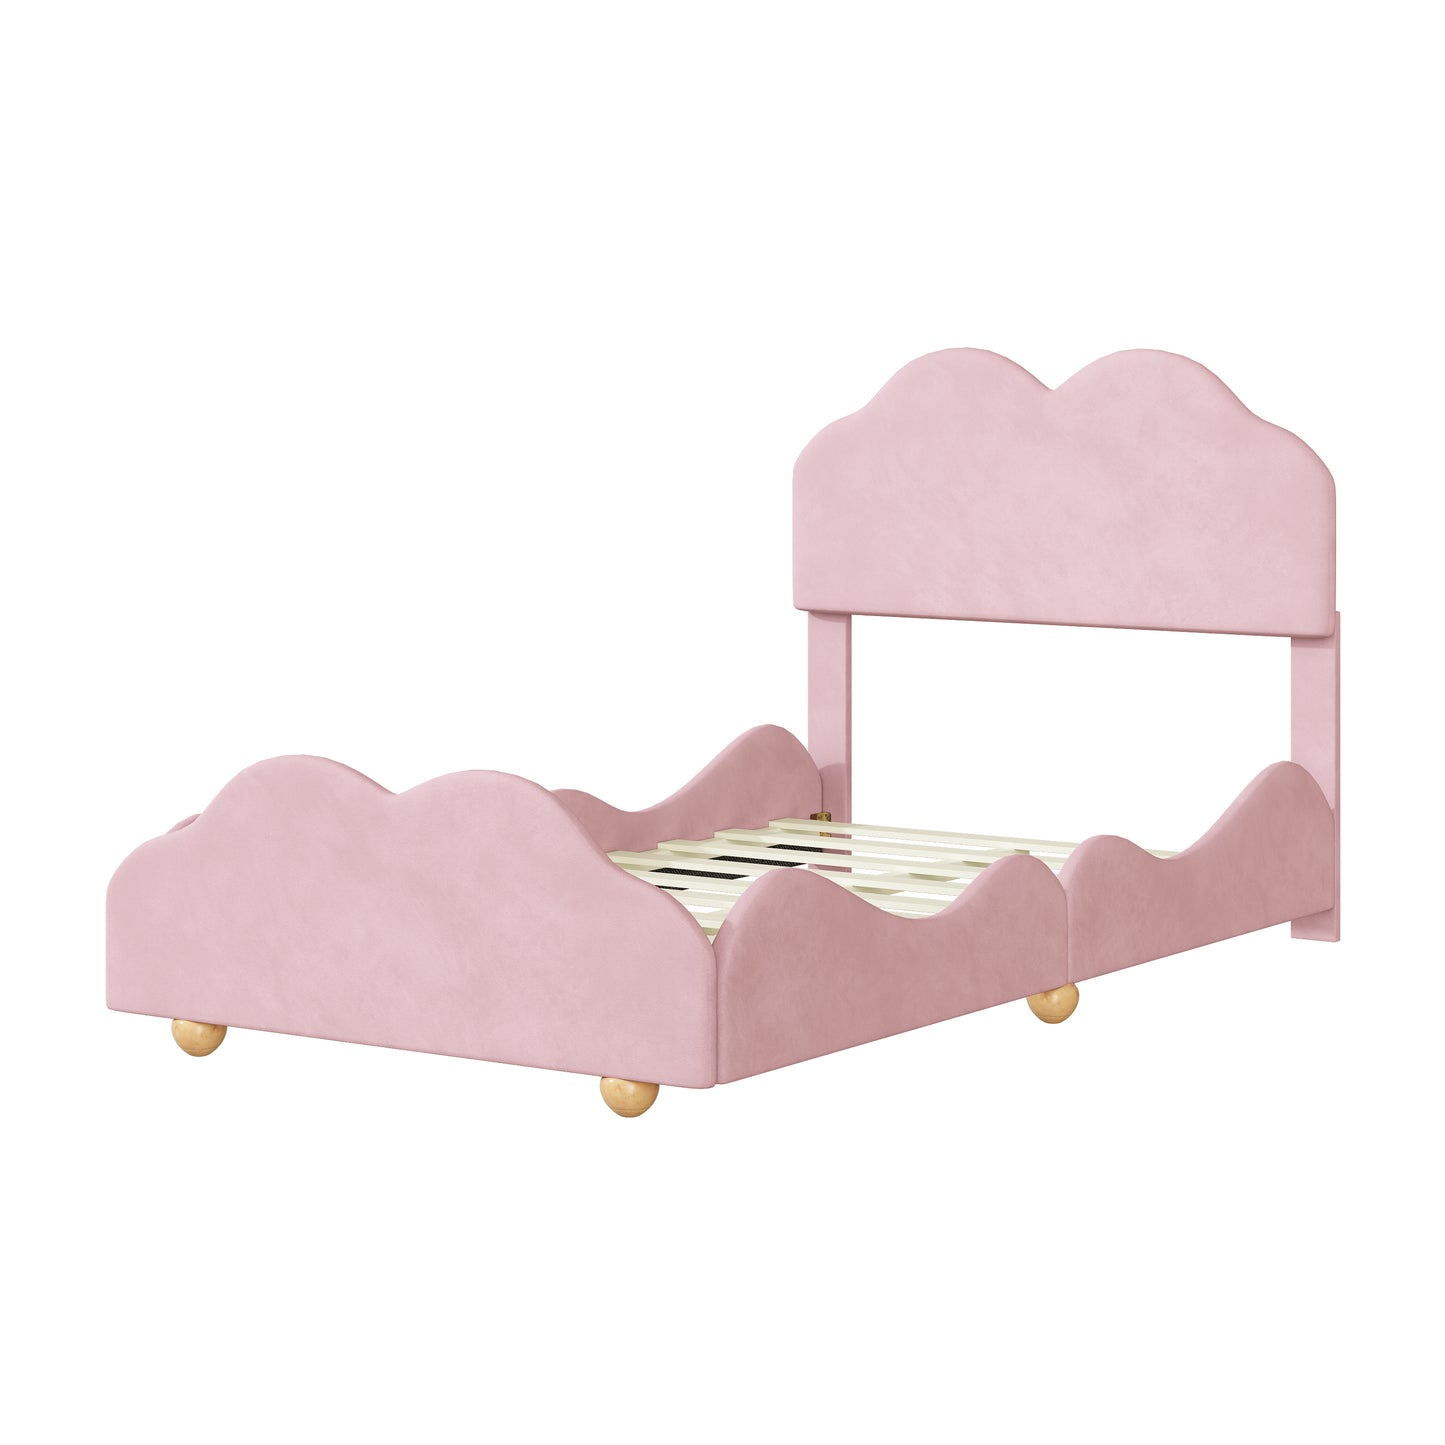 Twin Size Upholstered Platform Bed with Cloud Shaped bed board, Light Pink